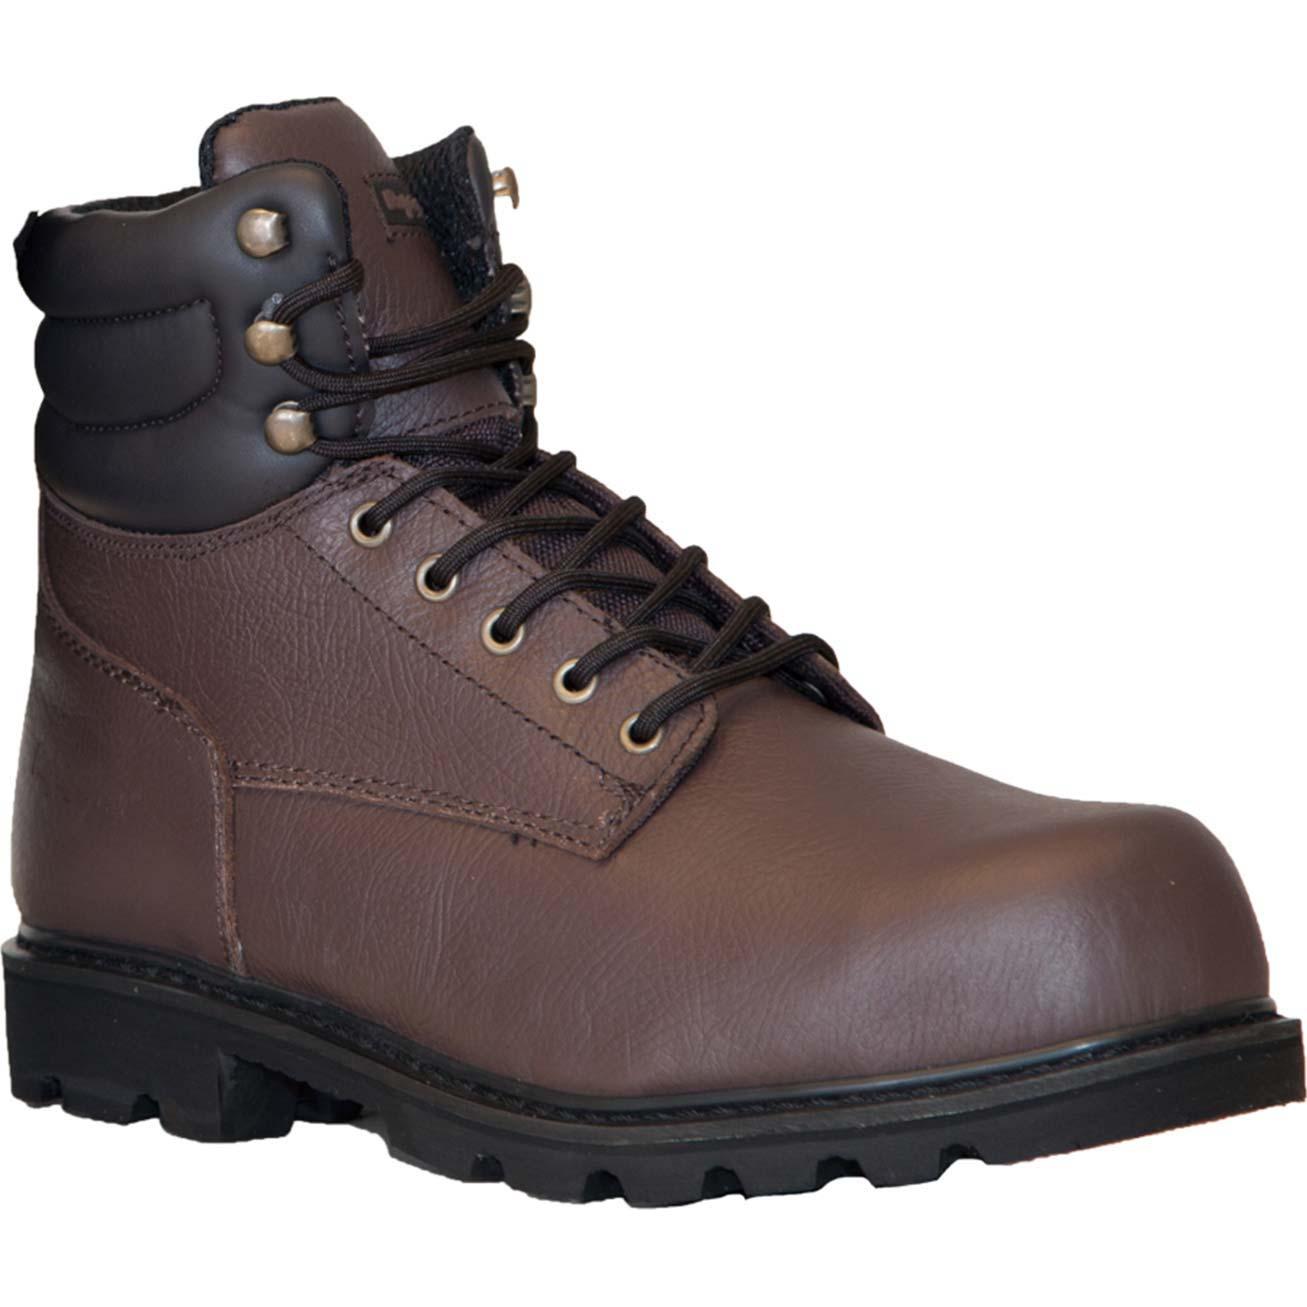 RefrigiWear Classic Leather Composite Toe Waterproof Insulated Work ...